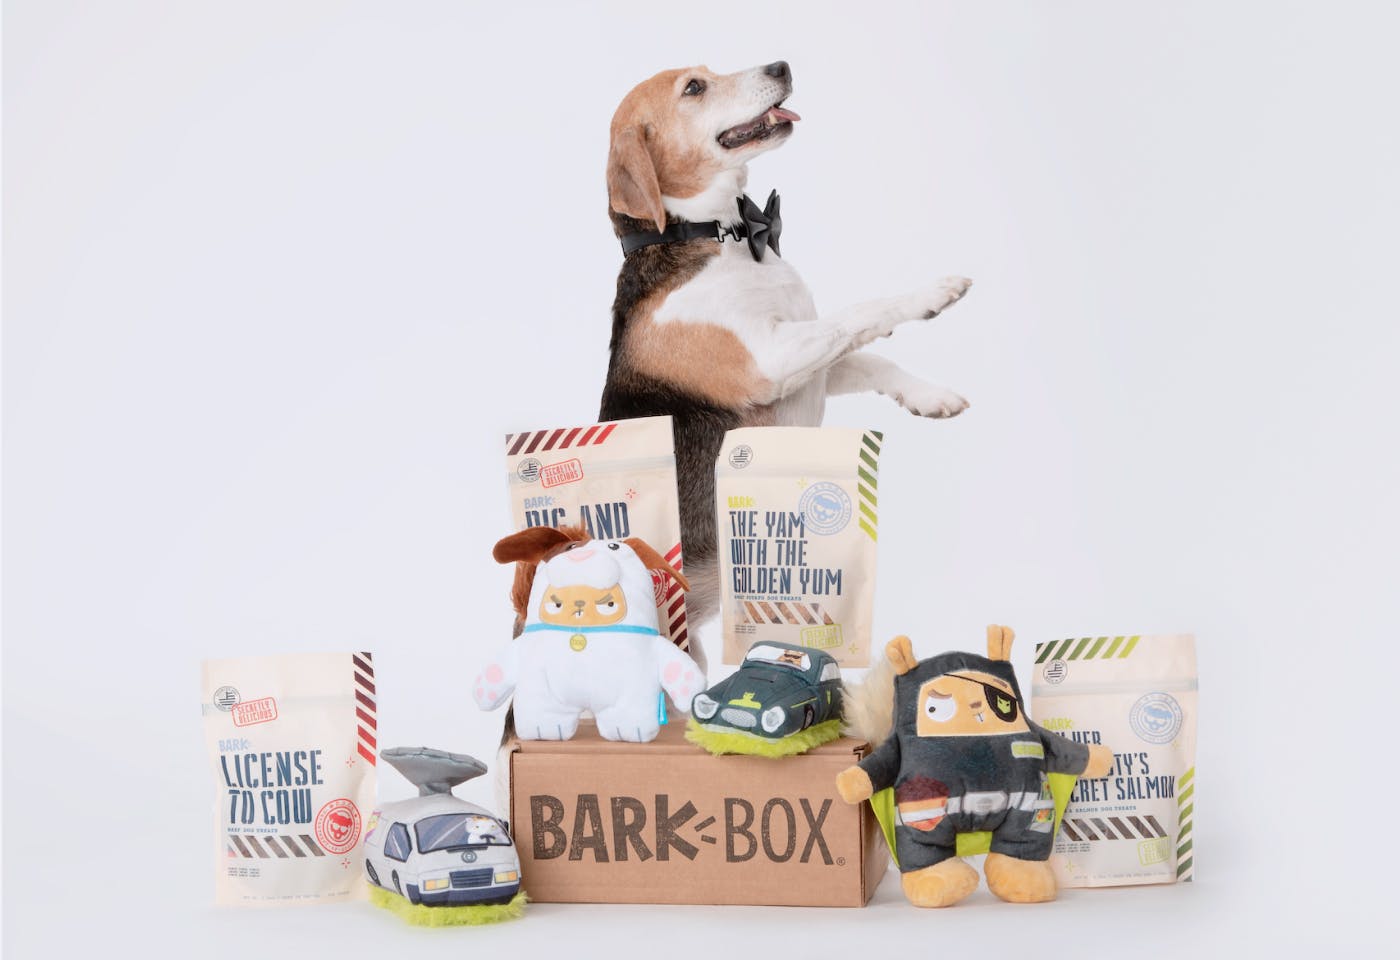 A beagle dog smiling with Bark Box products arranged in front of it.